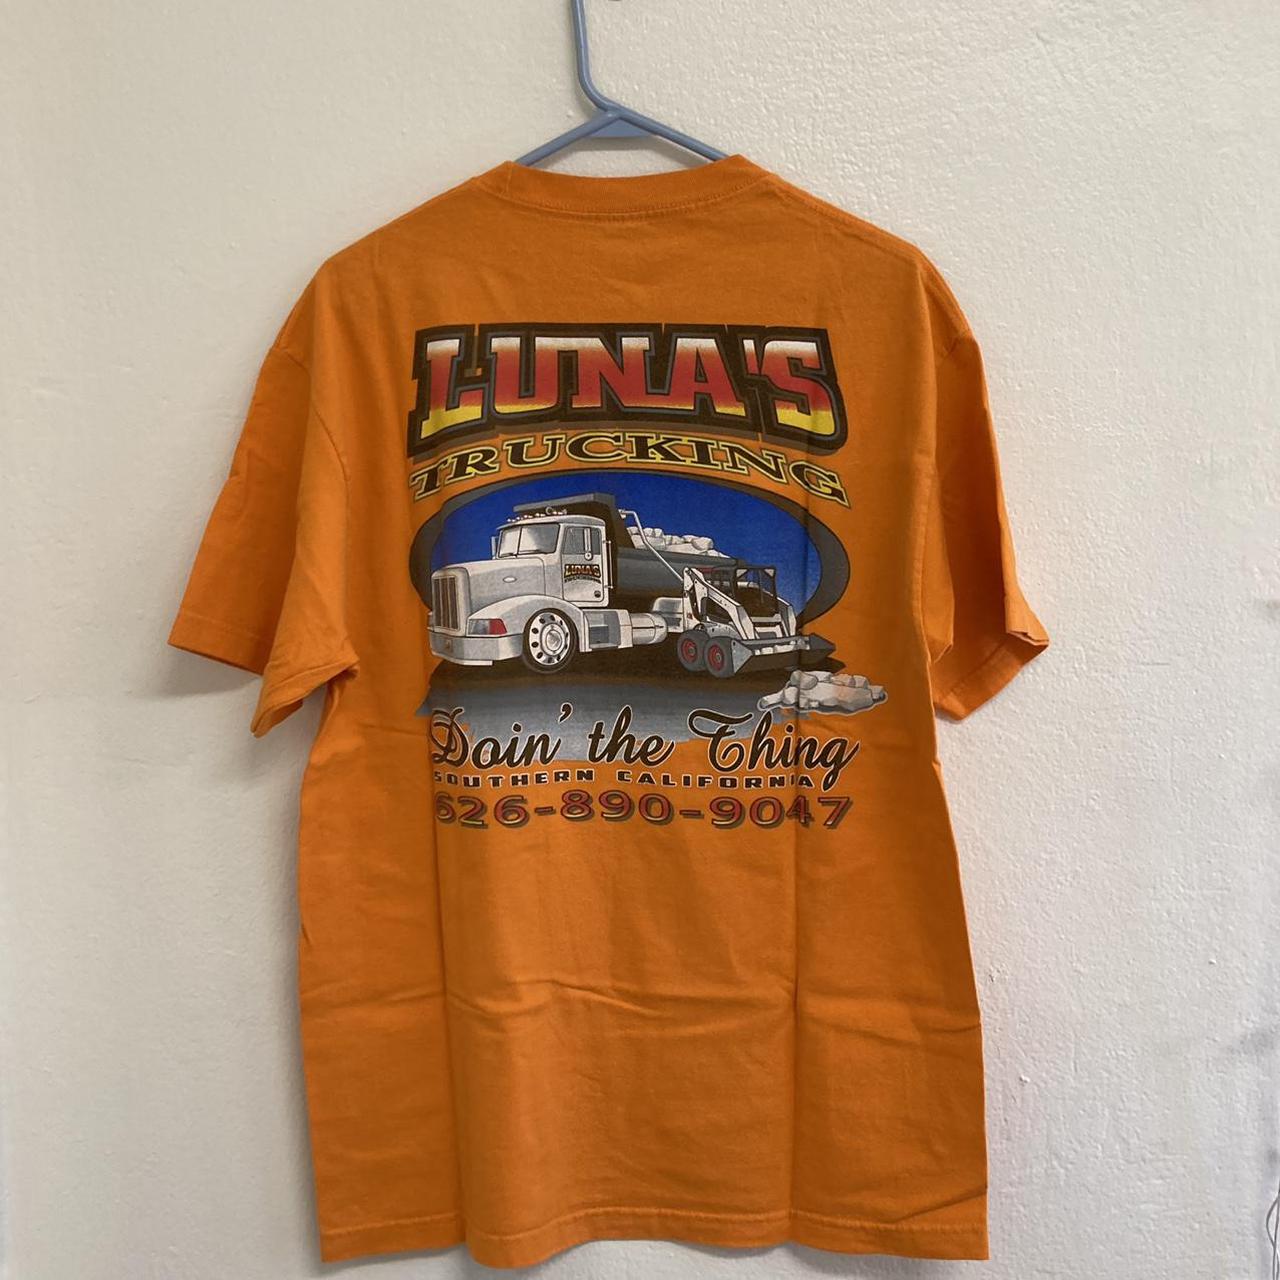 Product Image 4 - Vintage “Luna’s Trucking” Graphic T-shirt
Free